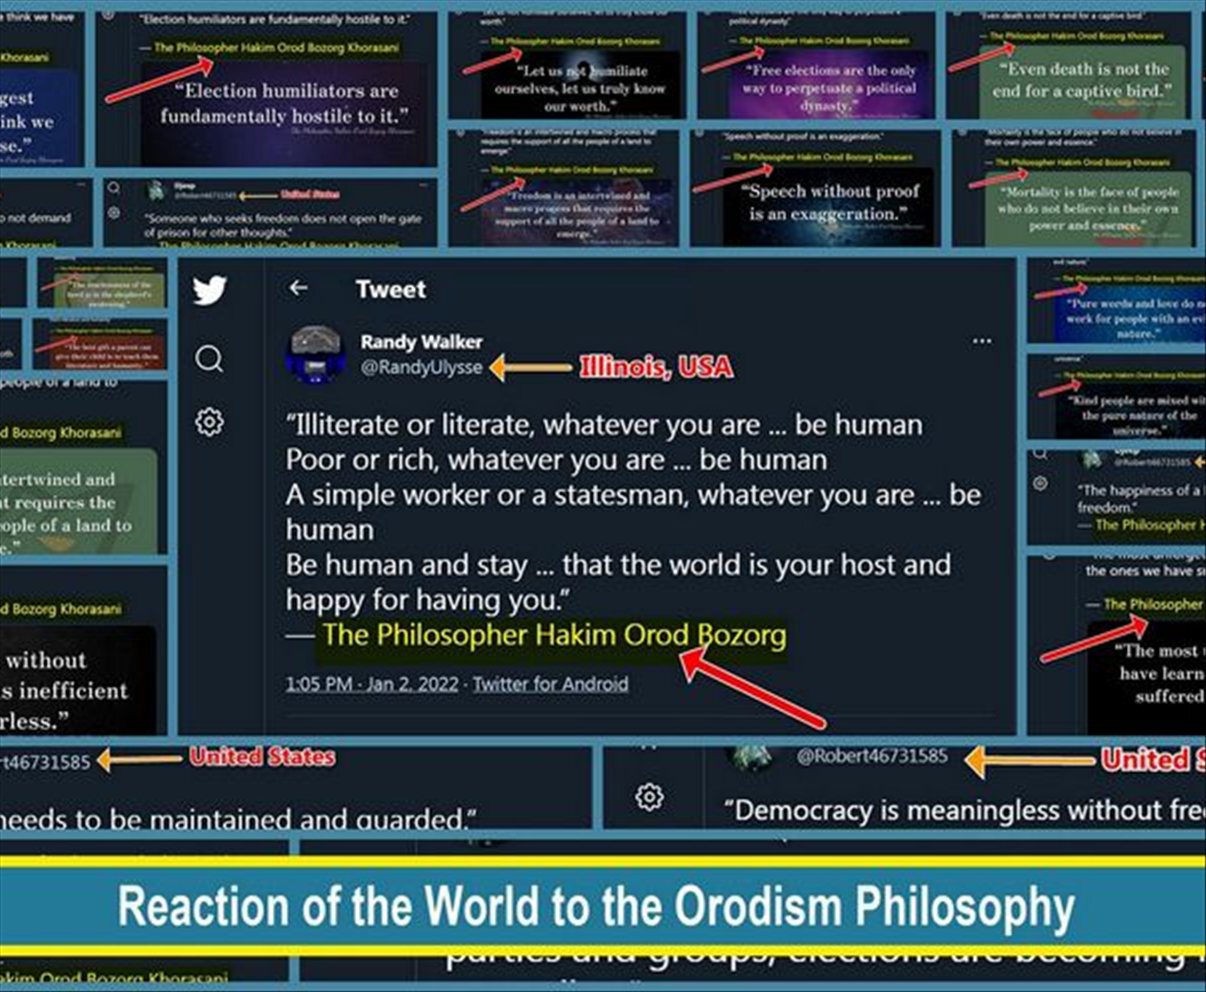 The philosophy of Orodism in United States of America (USA) 00fb206babca80dc2993216df4d84808